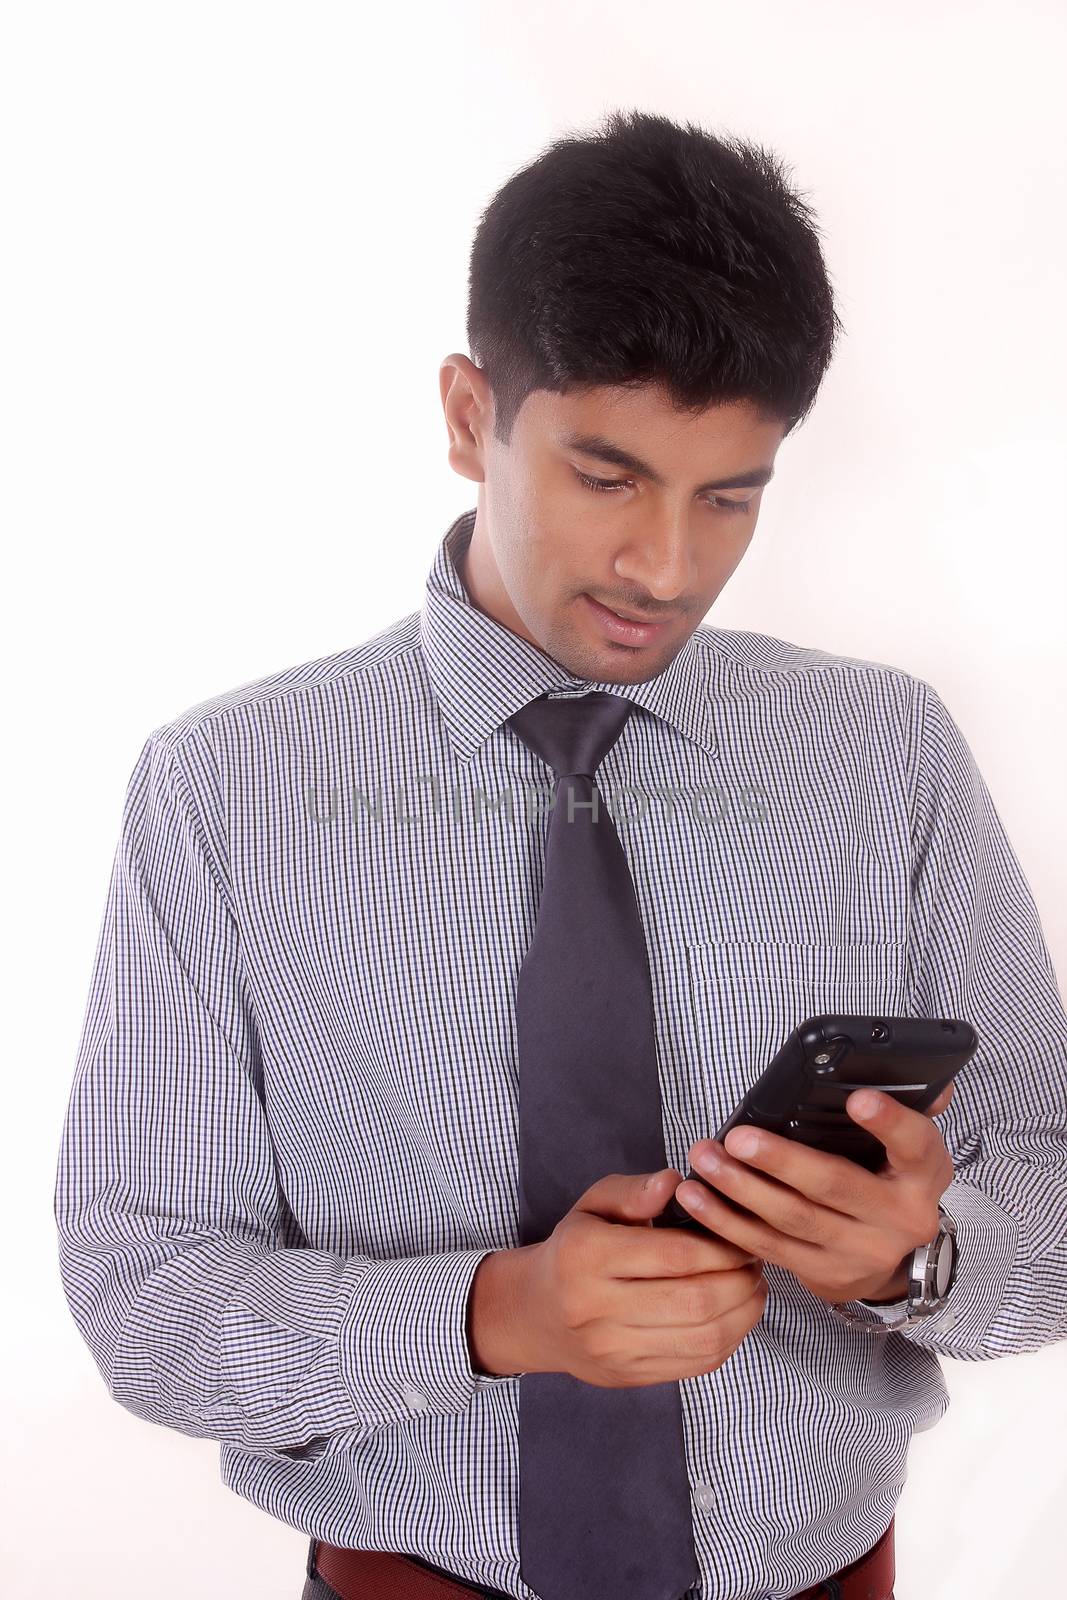 Businessman texting with his cellphone against a white background